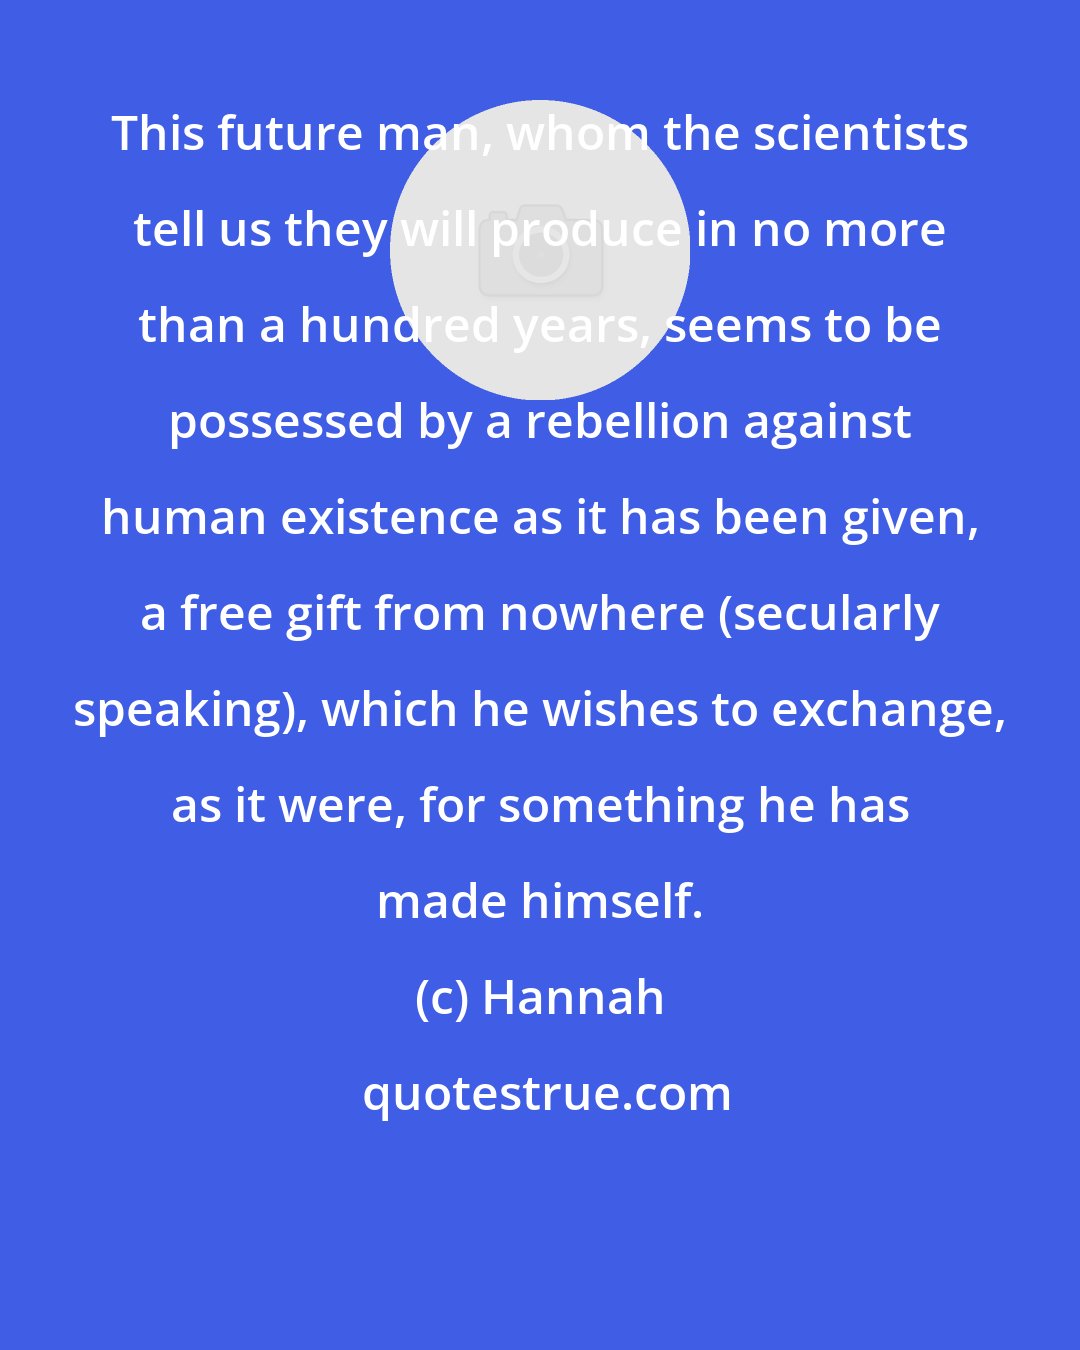 Hannah: This future man, whom the scientists tell us they will produce in no more than a hundred years, seems to be possessed by a rebellion against human existence as it has been given, a free gift from nowhere (secularly speaking), which he wishes to exchange, as it were, for something he has made himself.